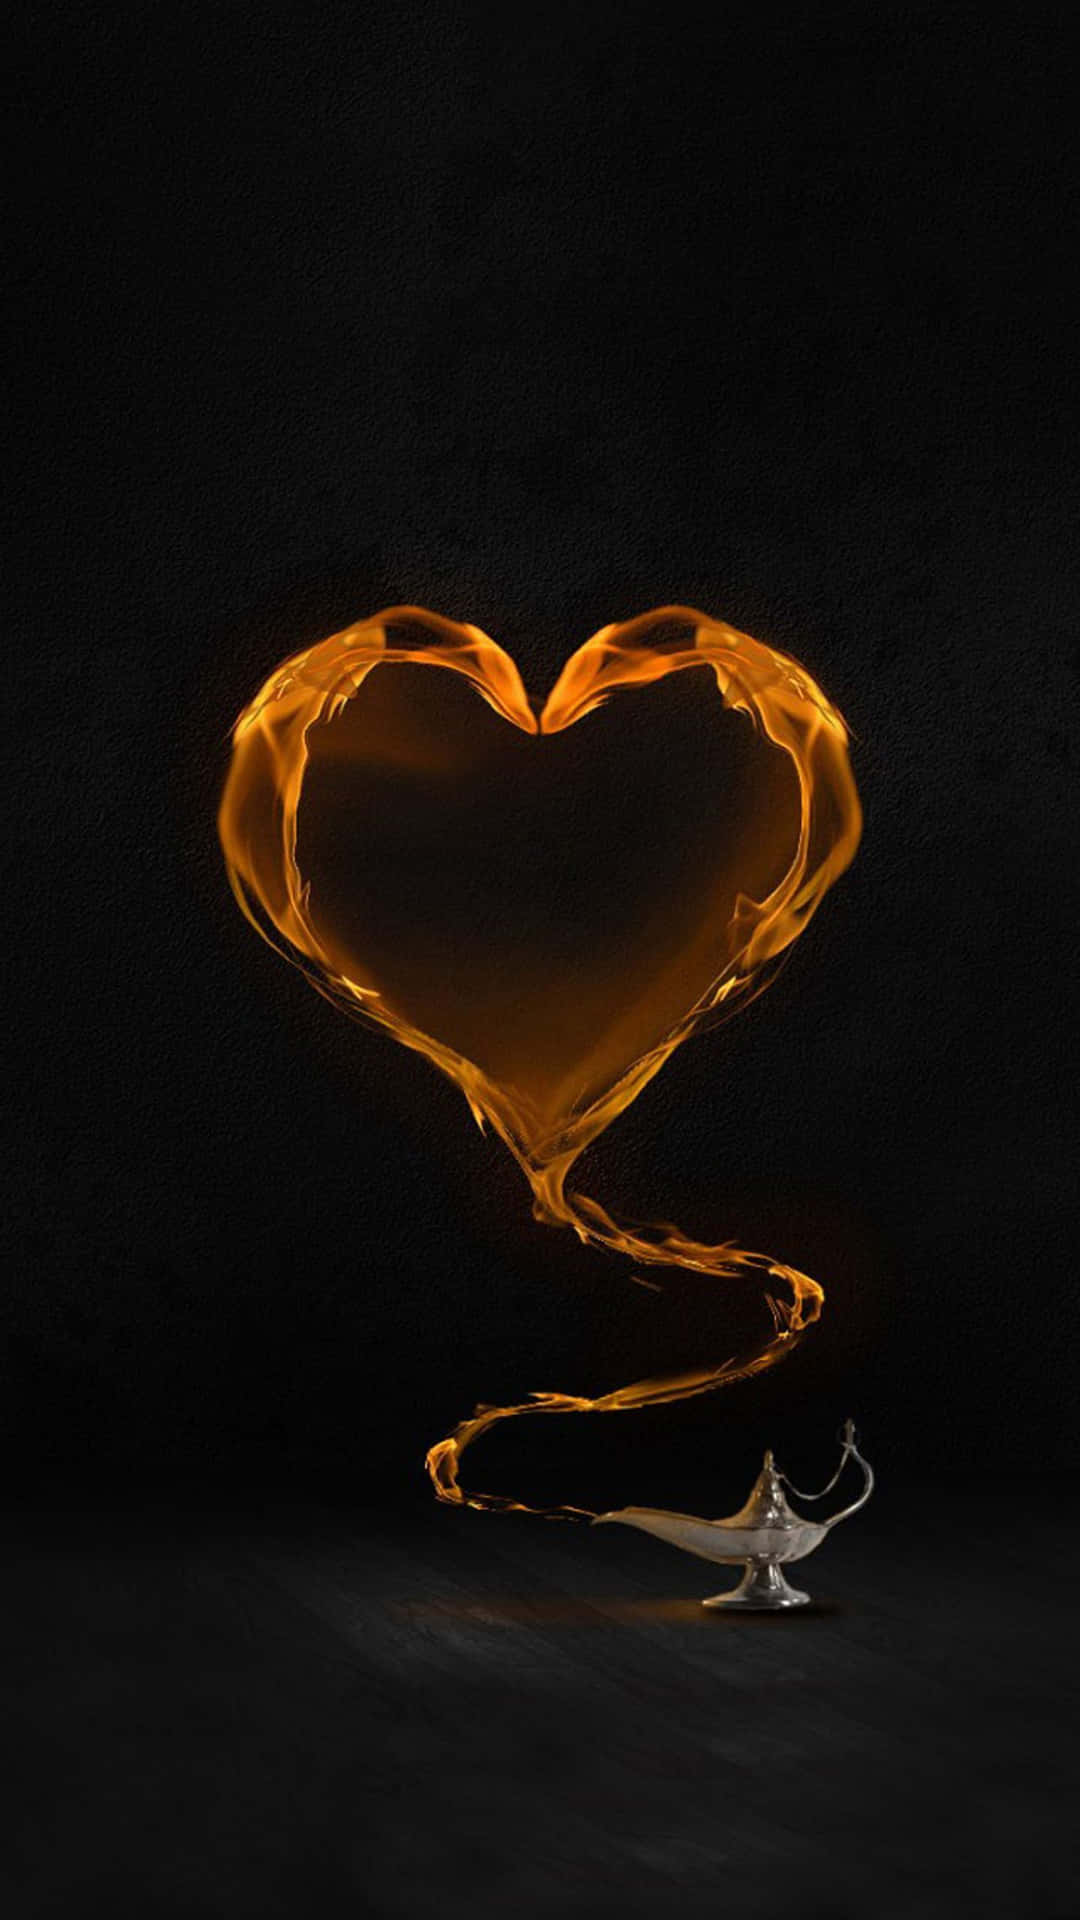 Yellow Heart Full of Love and Warmth Wallpaper